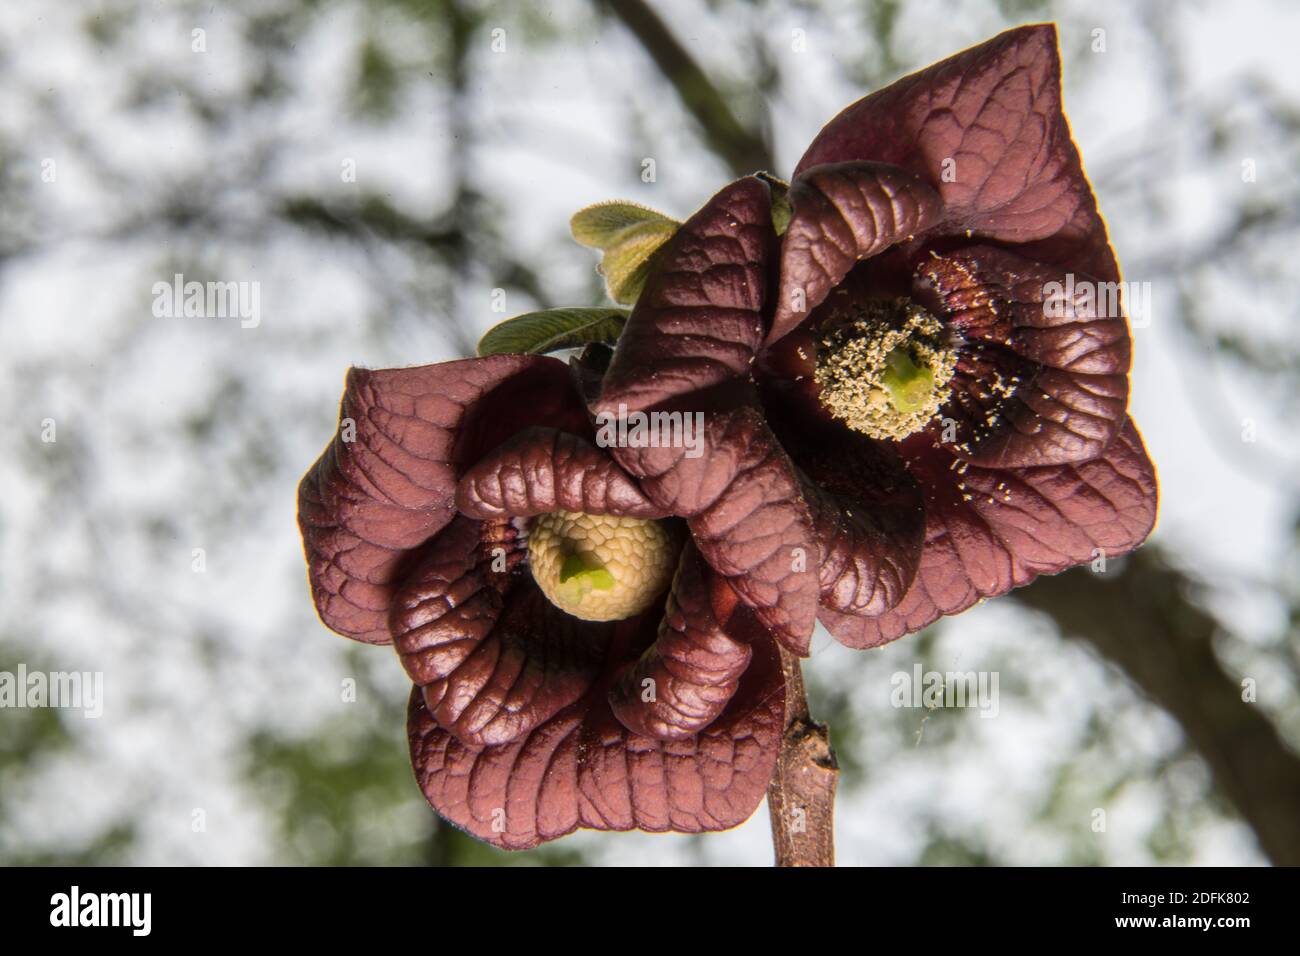 Pawpaw flower blooming in springtime on a Pawpaw tree in the forest. Stock Photo